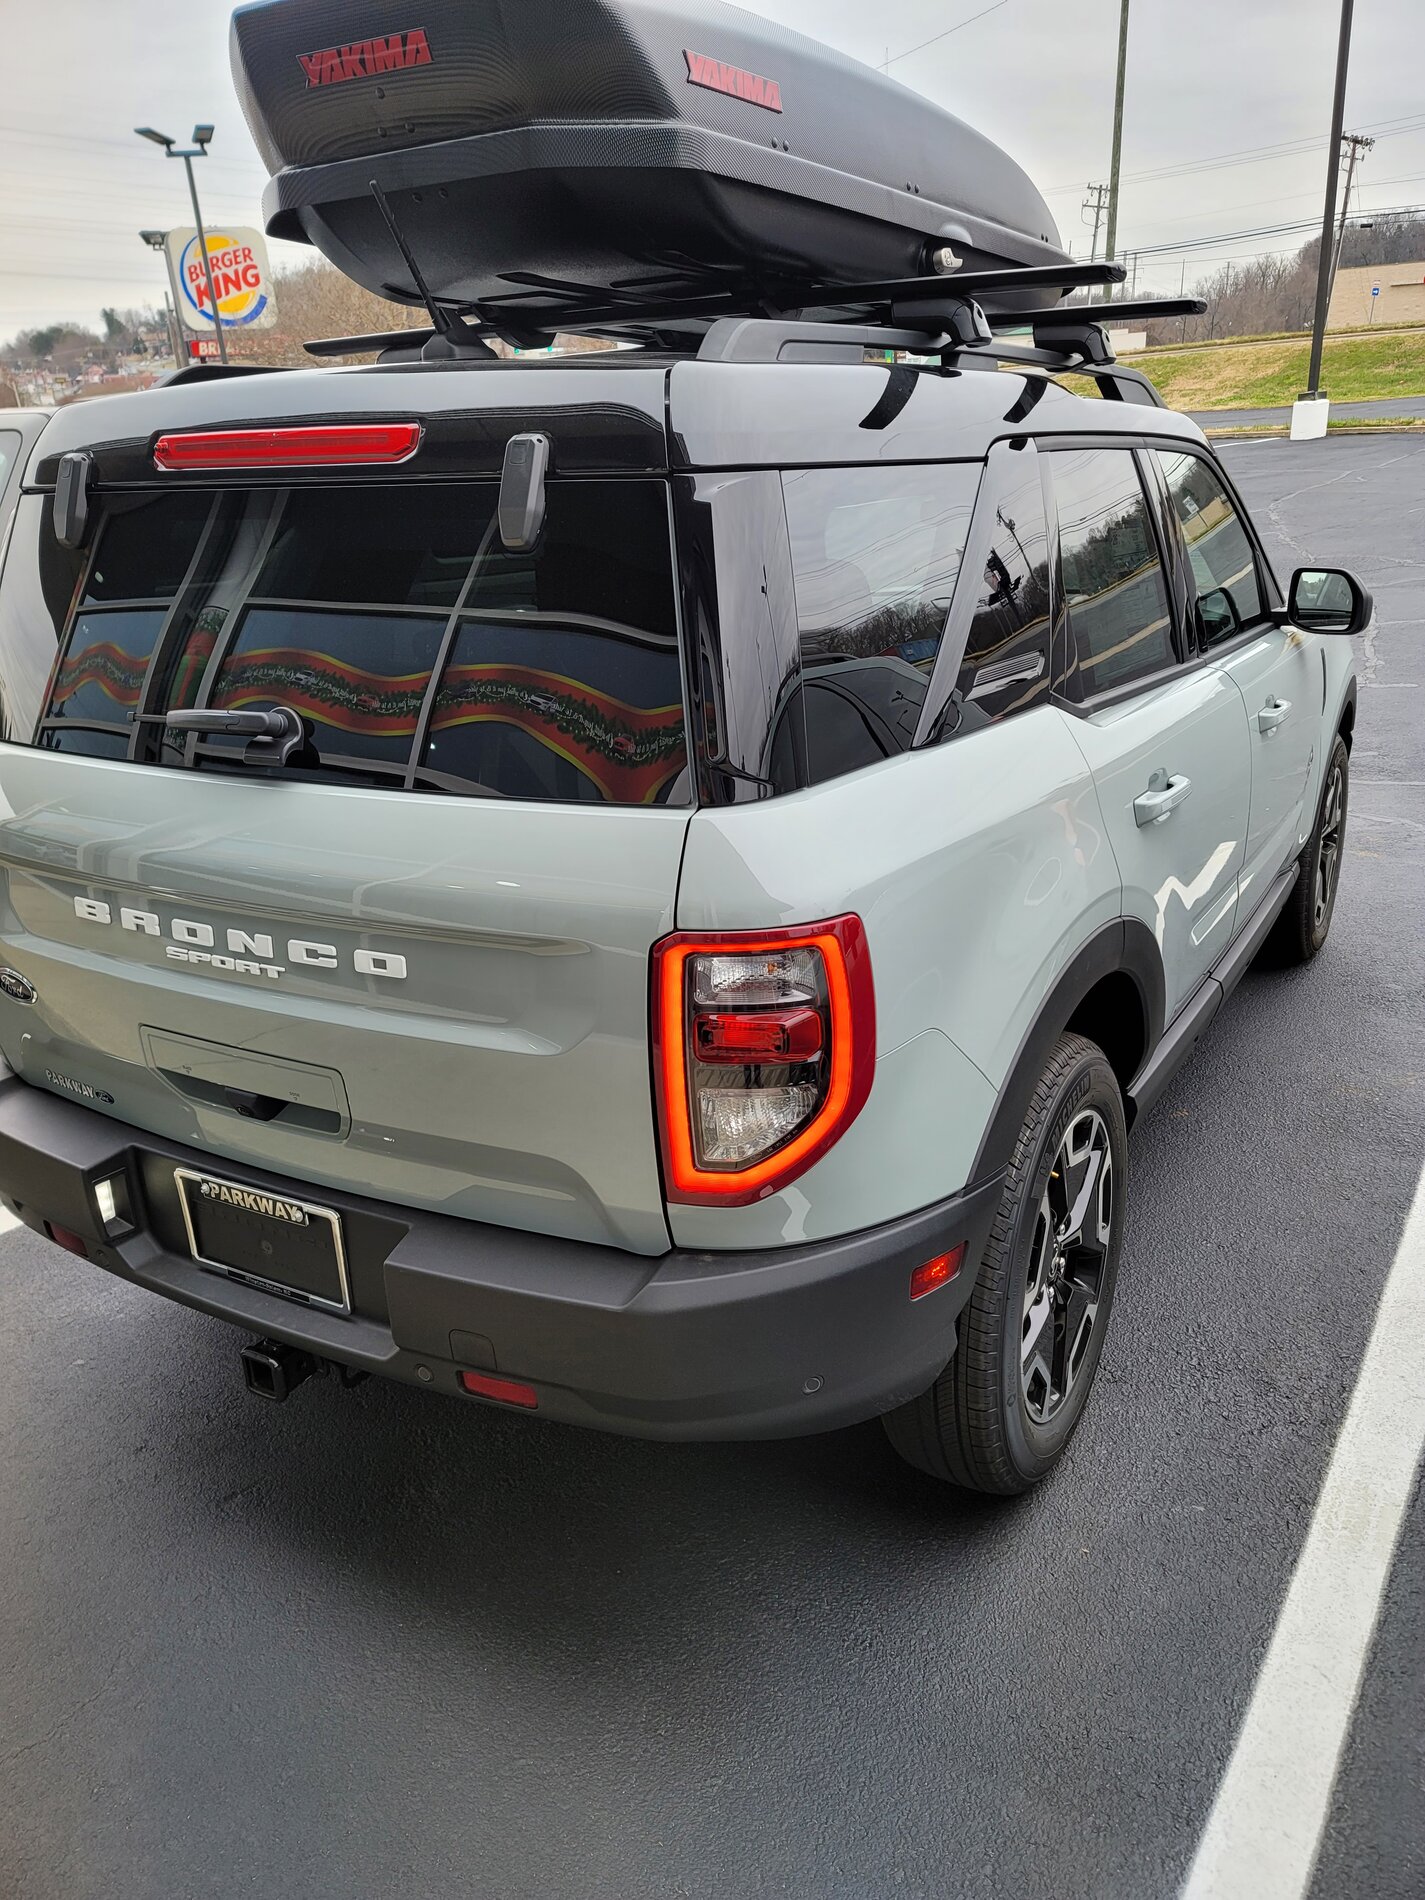 Ford Bronco Cactus Grey has evolved is my theory 125F1E55-E449-45C9-B3F1-5075A905ECBE